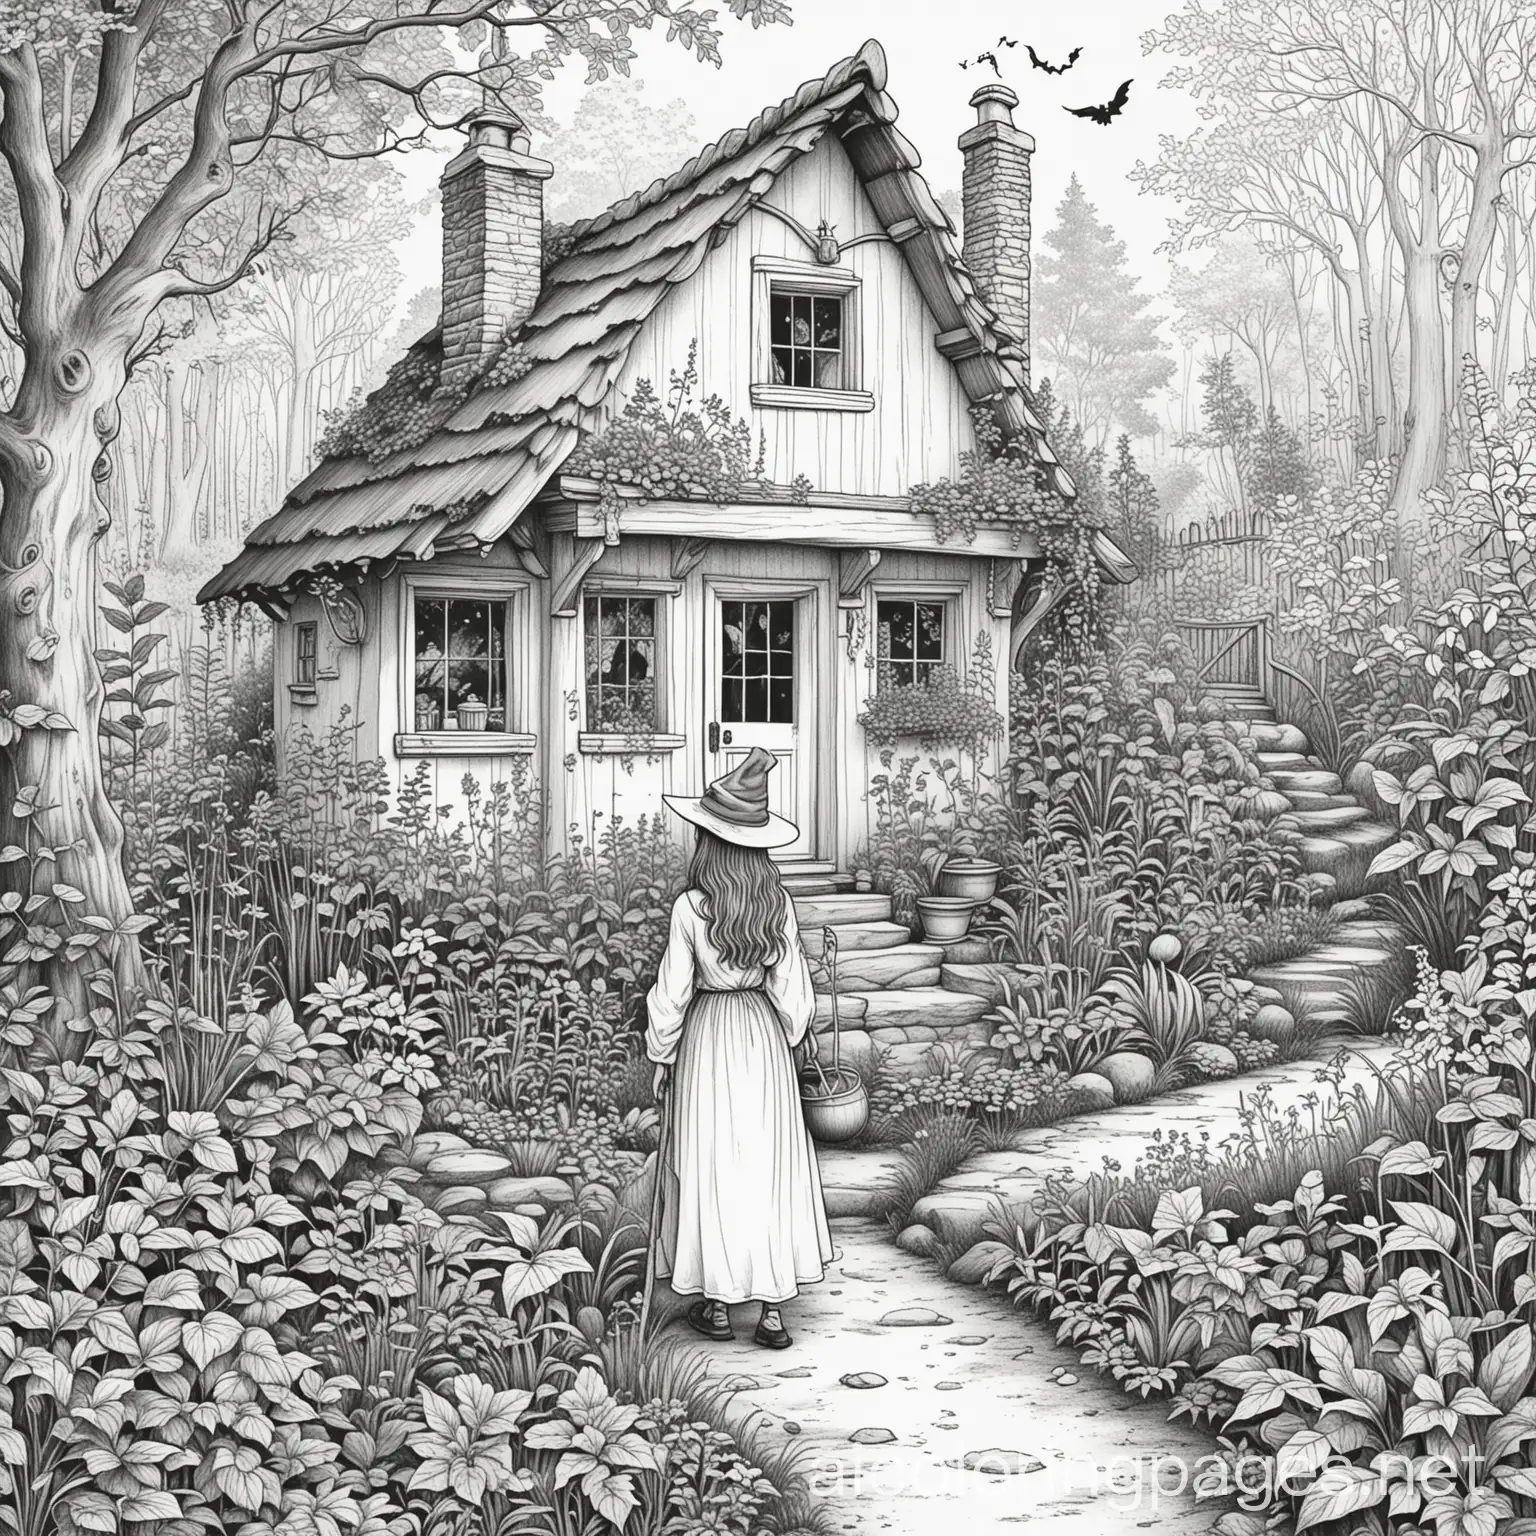 A witch living in a cottage deep in the woods, her garden filled with enchanted plants, Coloring Page, black and white, line art, white background, Simplicity, Ample White Space. The background of the coloring page is plain white to make it easy for young children to color within the lines. The outlines of all the subjects are easy to distinguish, making it simple for kids to color without too much difficulty